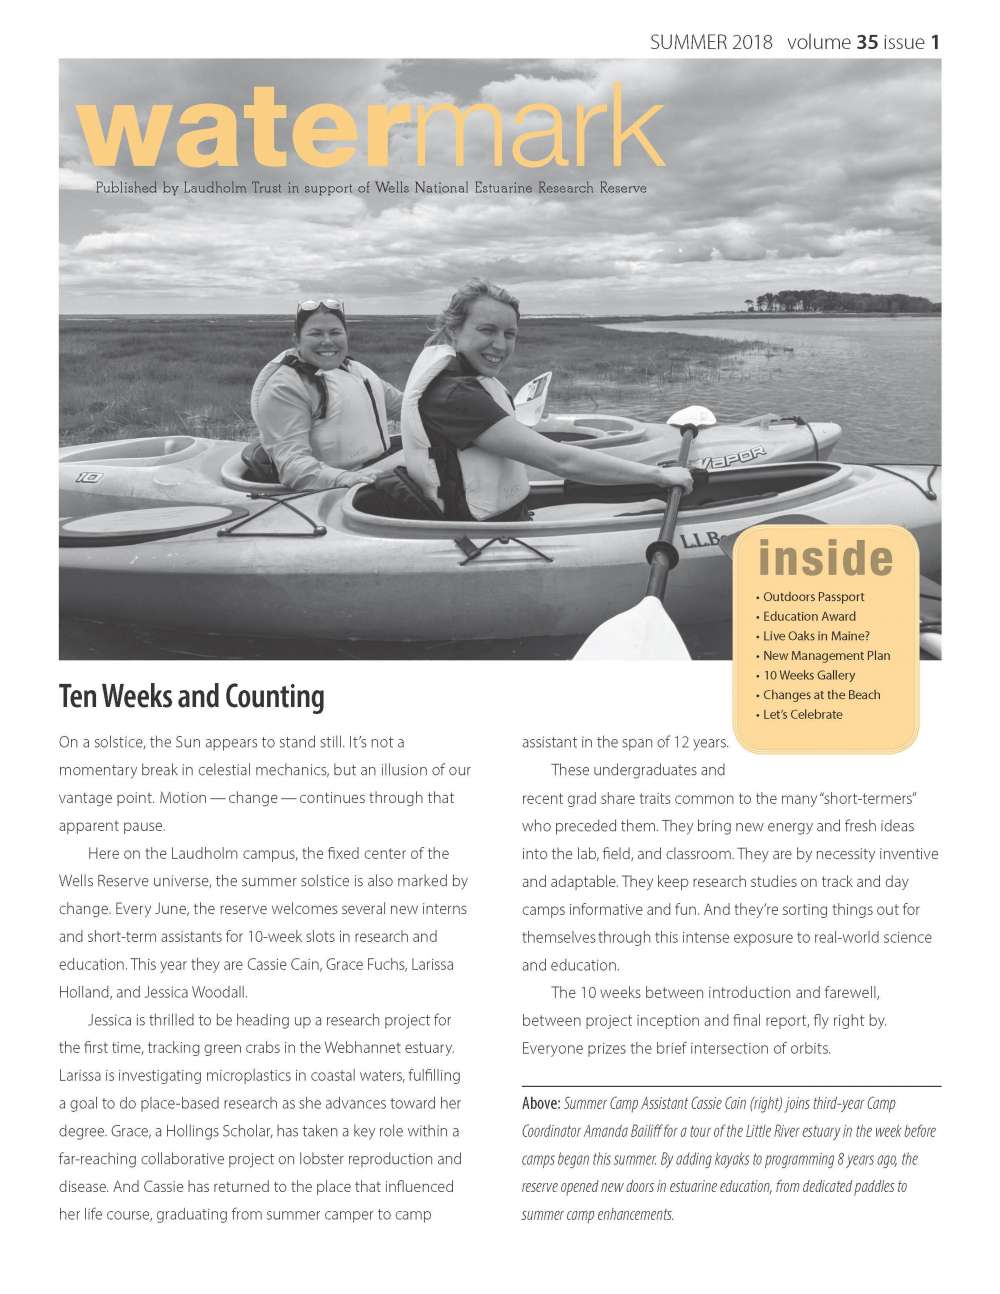 Cover of Watermark for Summer 2018